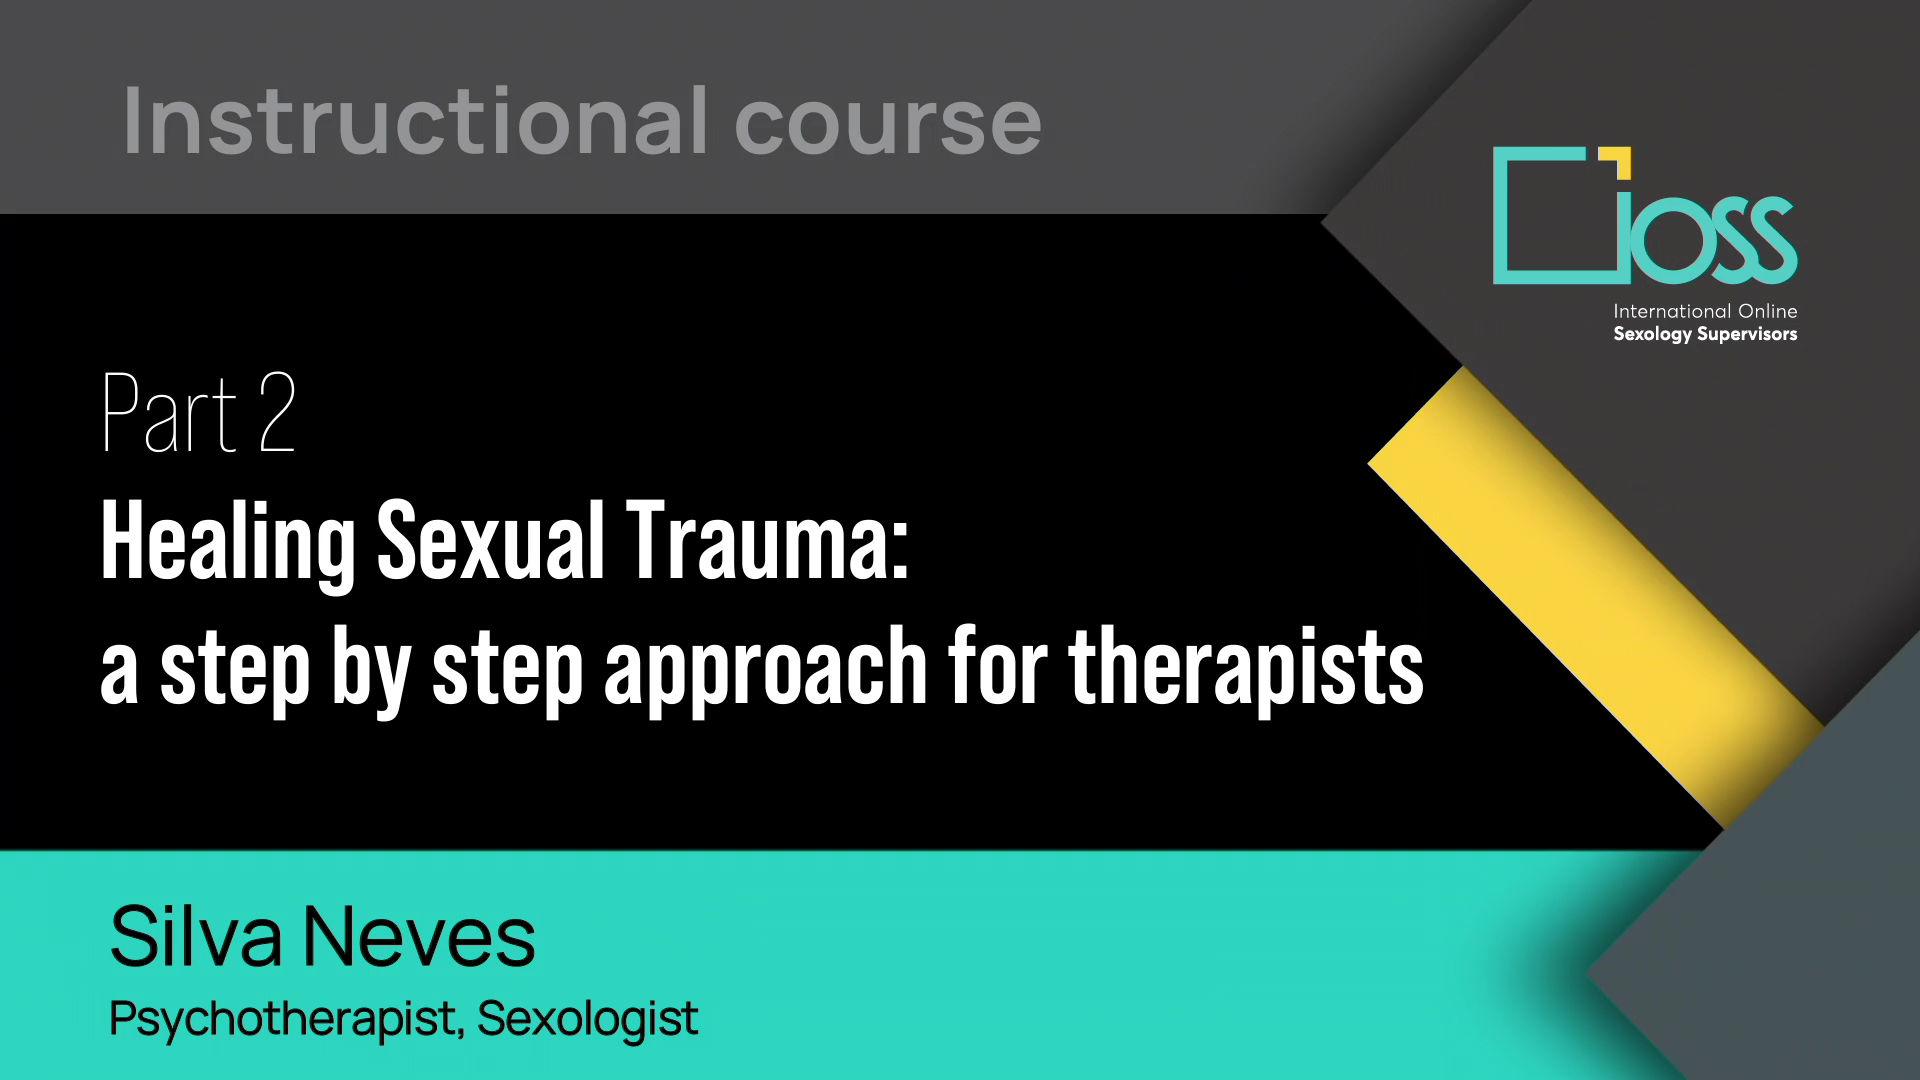 Part 2 Healing Sexual Trauma: a step by step approach for therapists (Part 1 & 2)